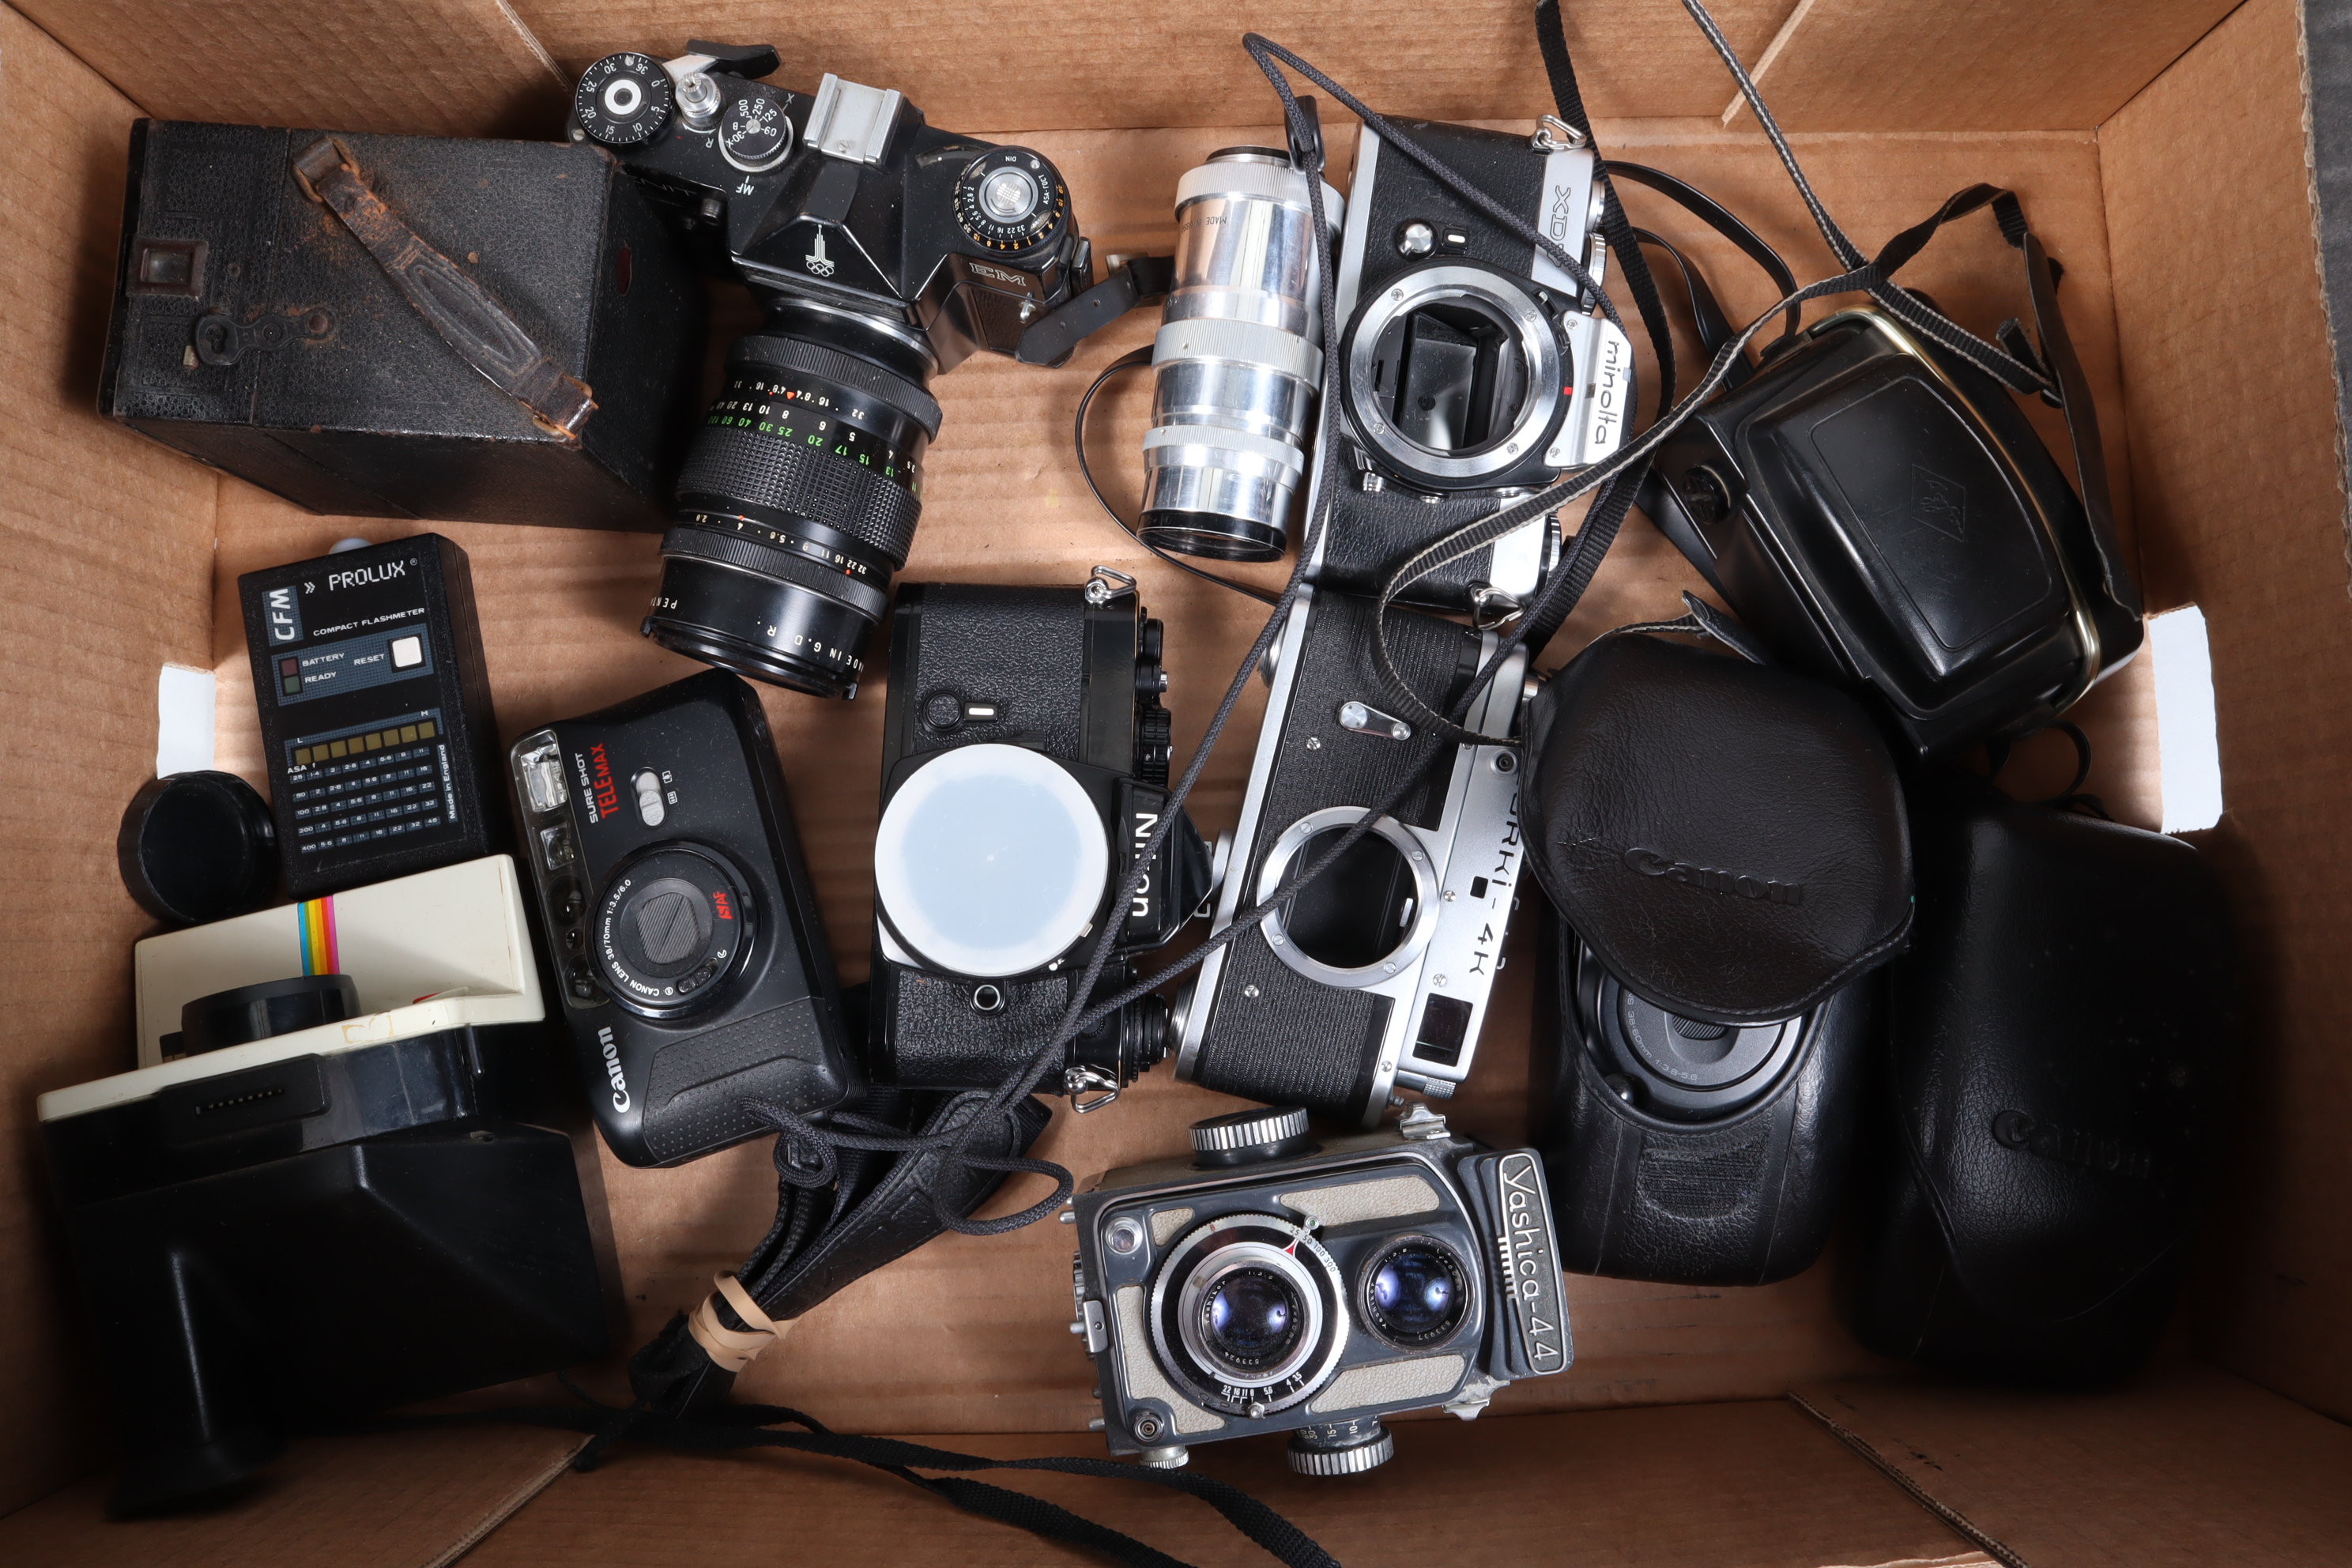 A Tray of Various Cameras, including Sureshot Telemax, Zoom-S 92) compacts, untested, a Zenit E,